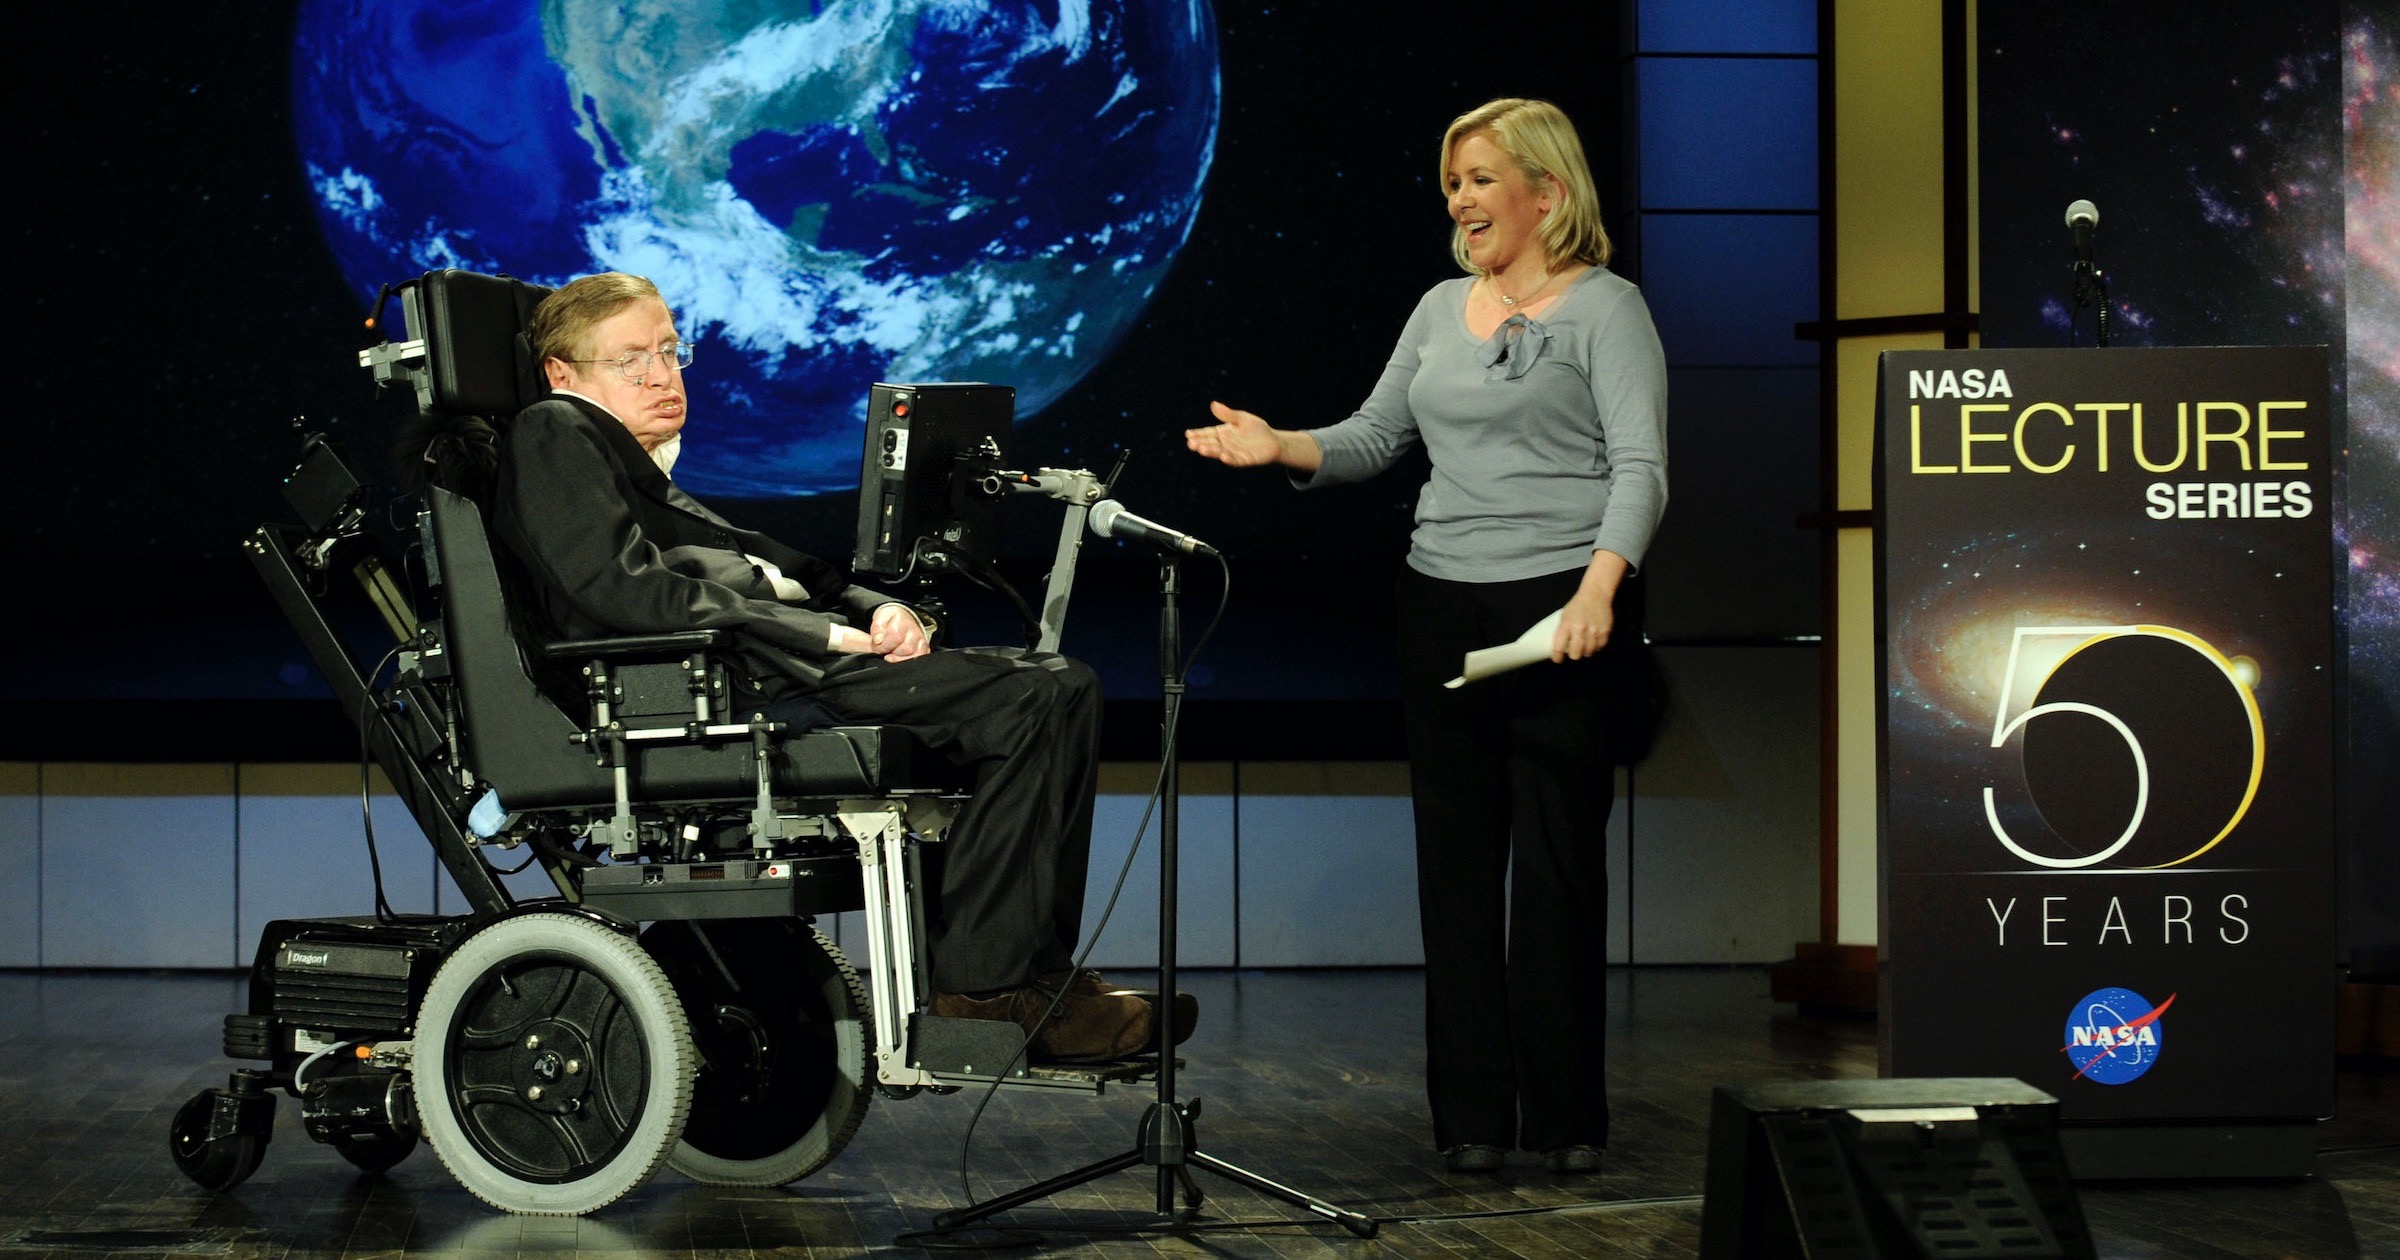 “Anti-Hagiography”: A Critical Look at Stephen Hawking - Discovery Institute